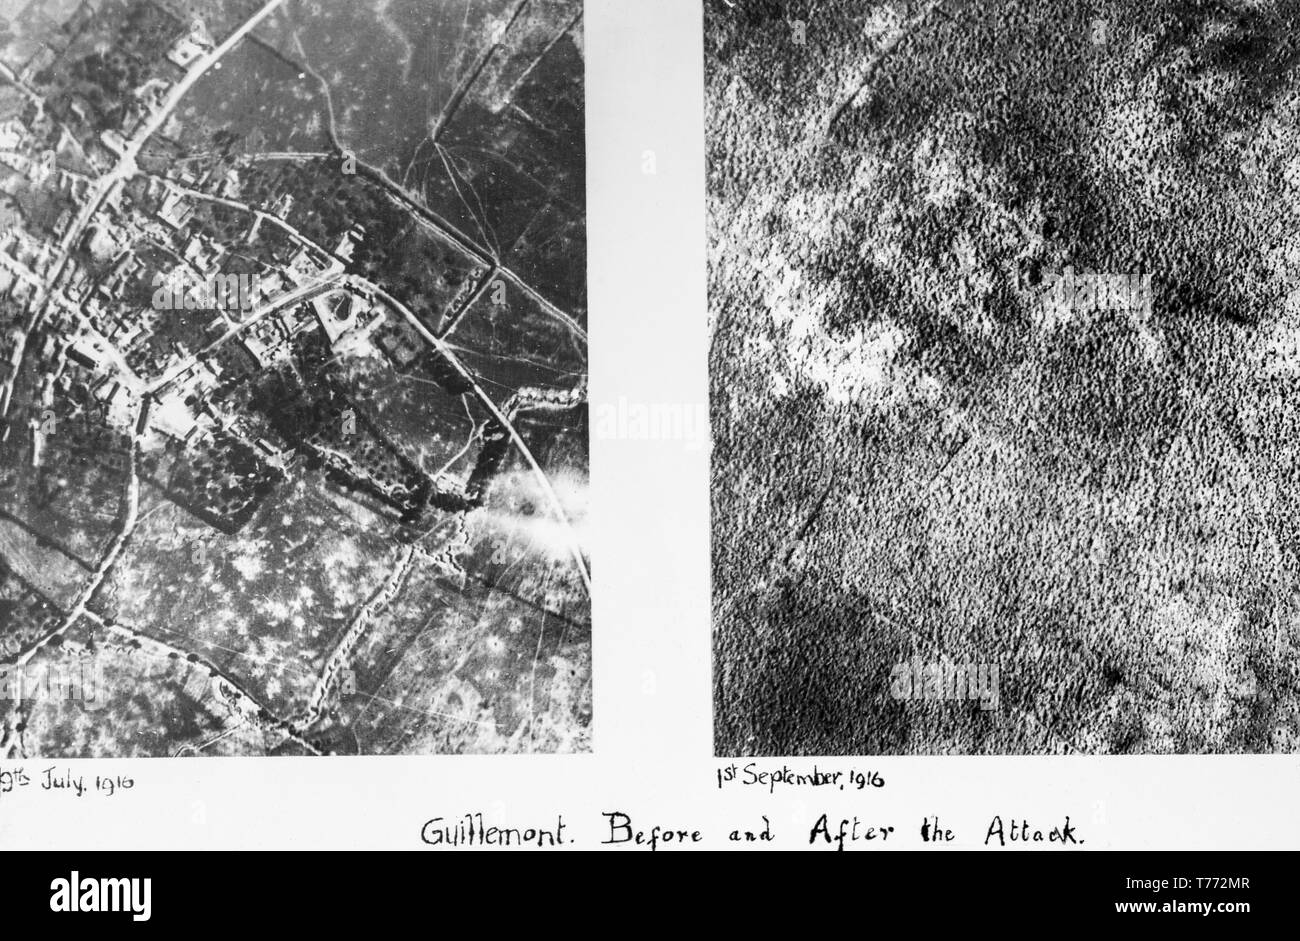 Two seperate black and white British aerial photographs, taken on 9th July 1916, and 1st September 1916, of the village of Guillemot in the Somme area of Northern France. The photographs show the complete destruction of the area after the fighting during the war. Stock Photo